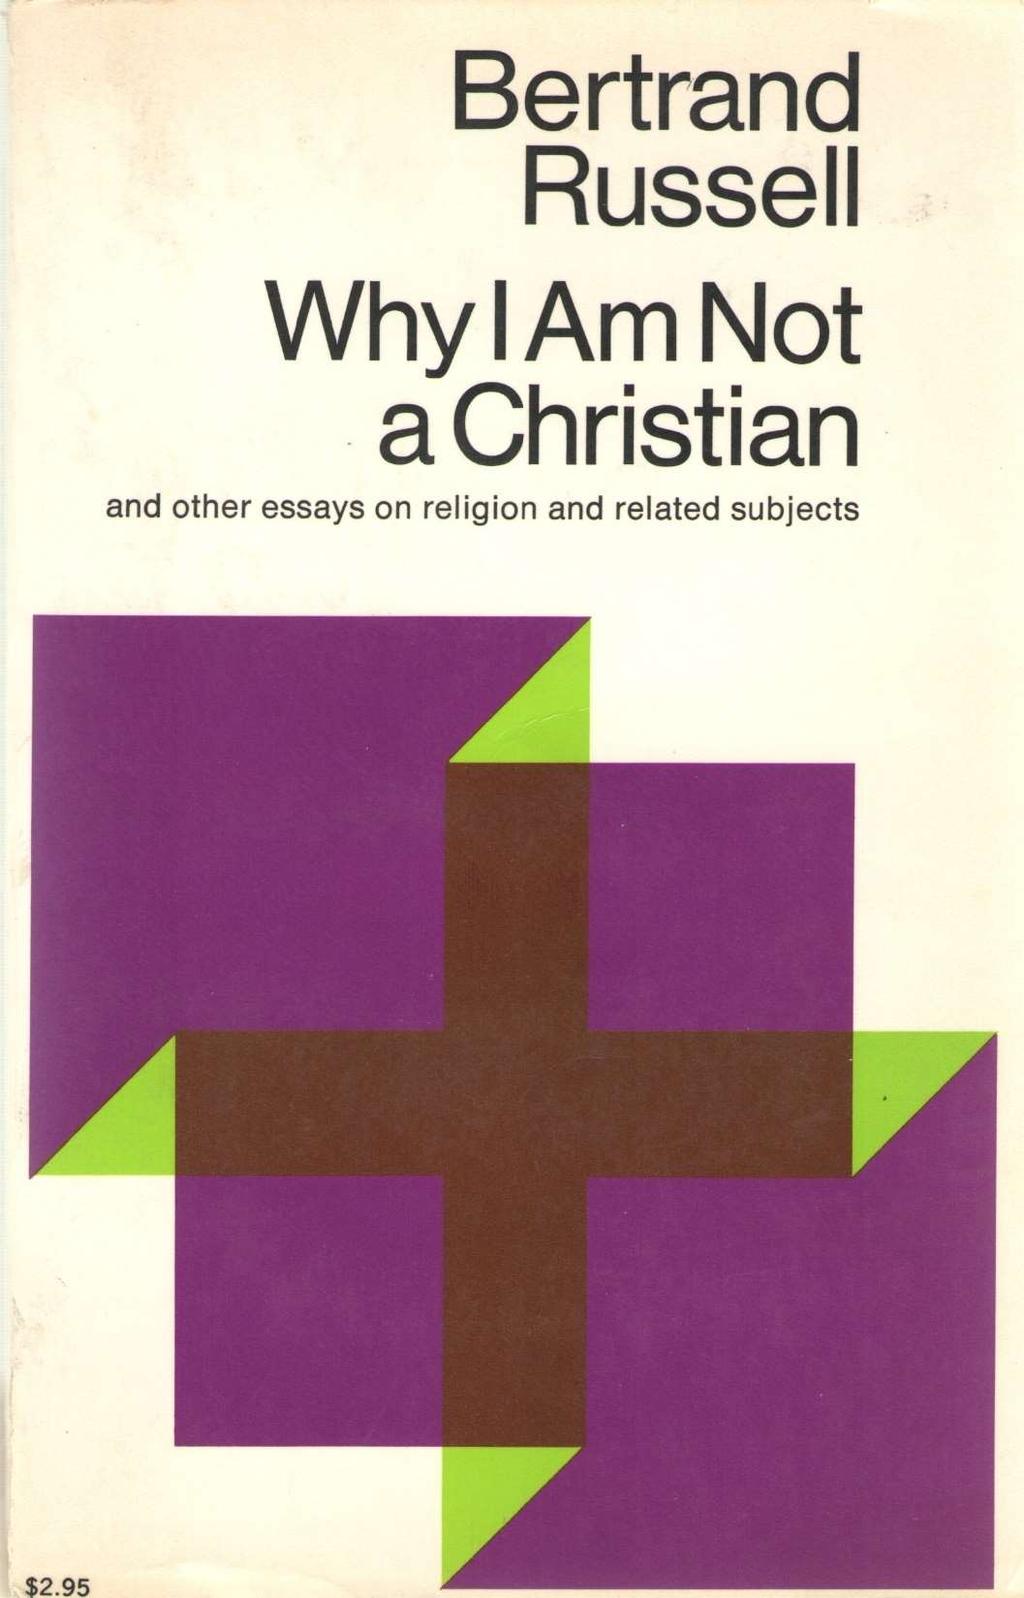 " [Bertrand Russell, Why I Am Not a Christian and Other Essays on Religion and